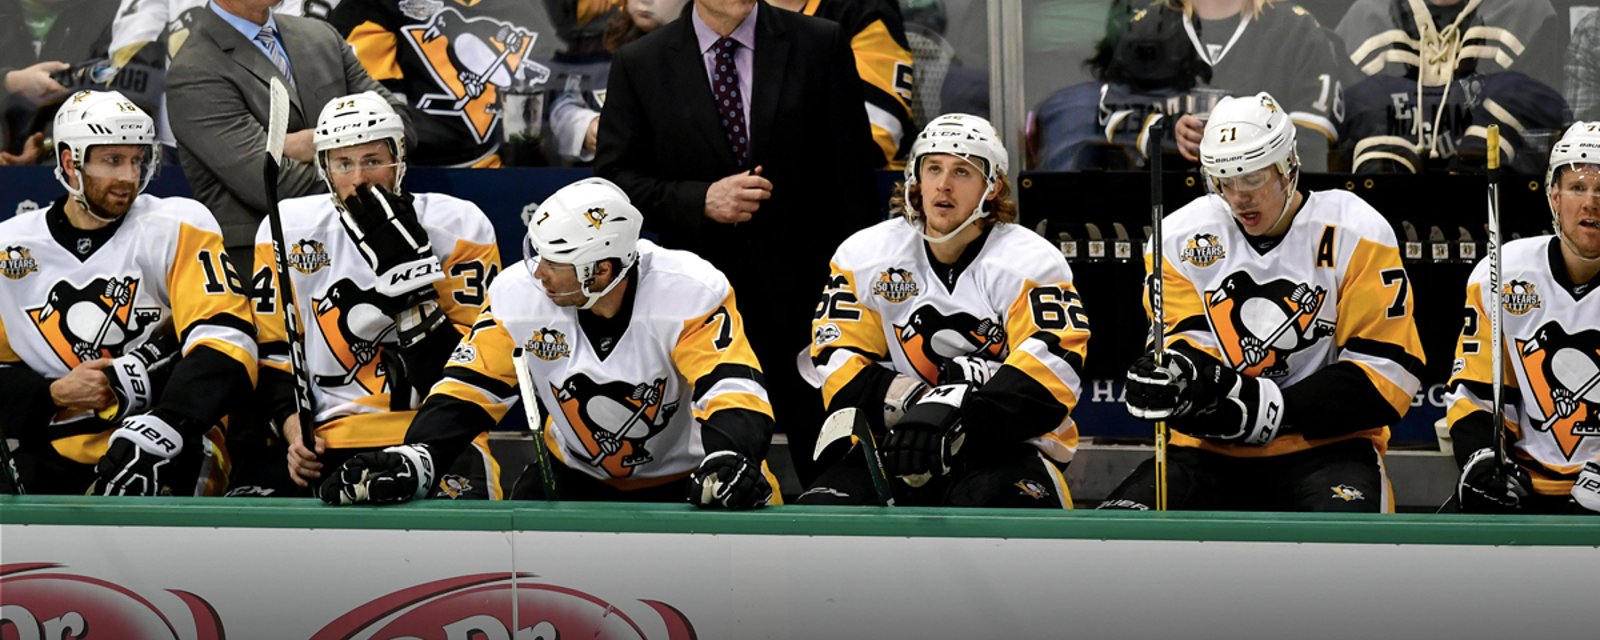 Report: Pens announce lineup change up front for tonight's game